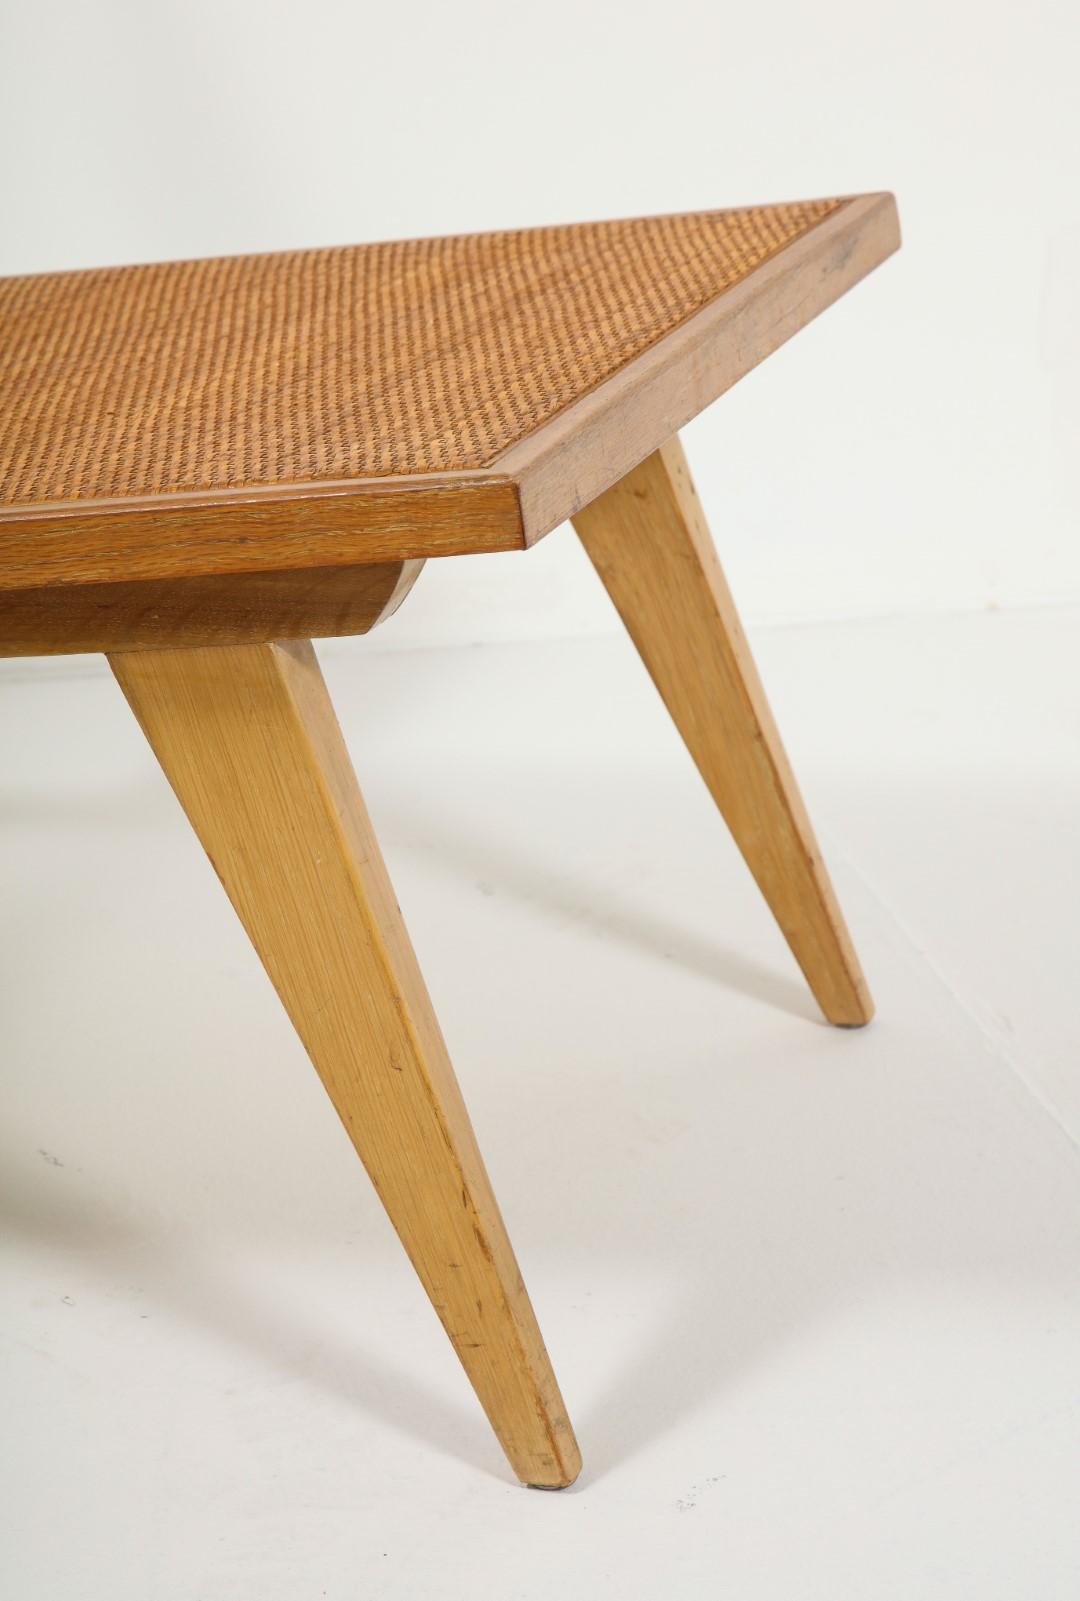 Midcentury Woven Oak Lounge Chair by Edward Durell Stone for Fulbright For Sale 1